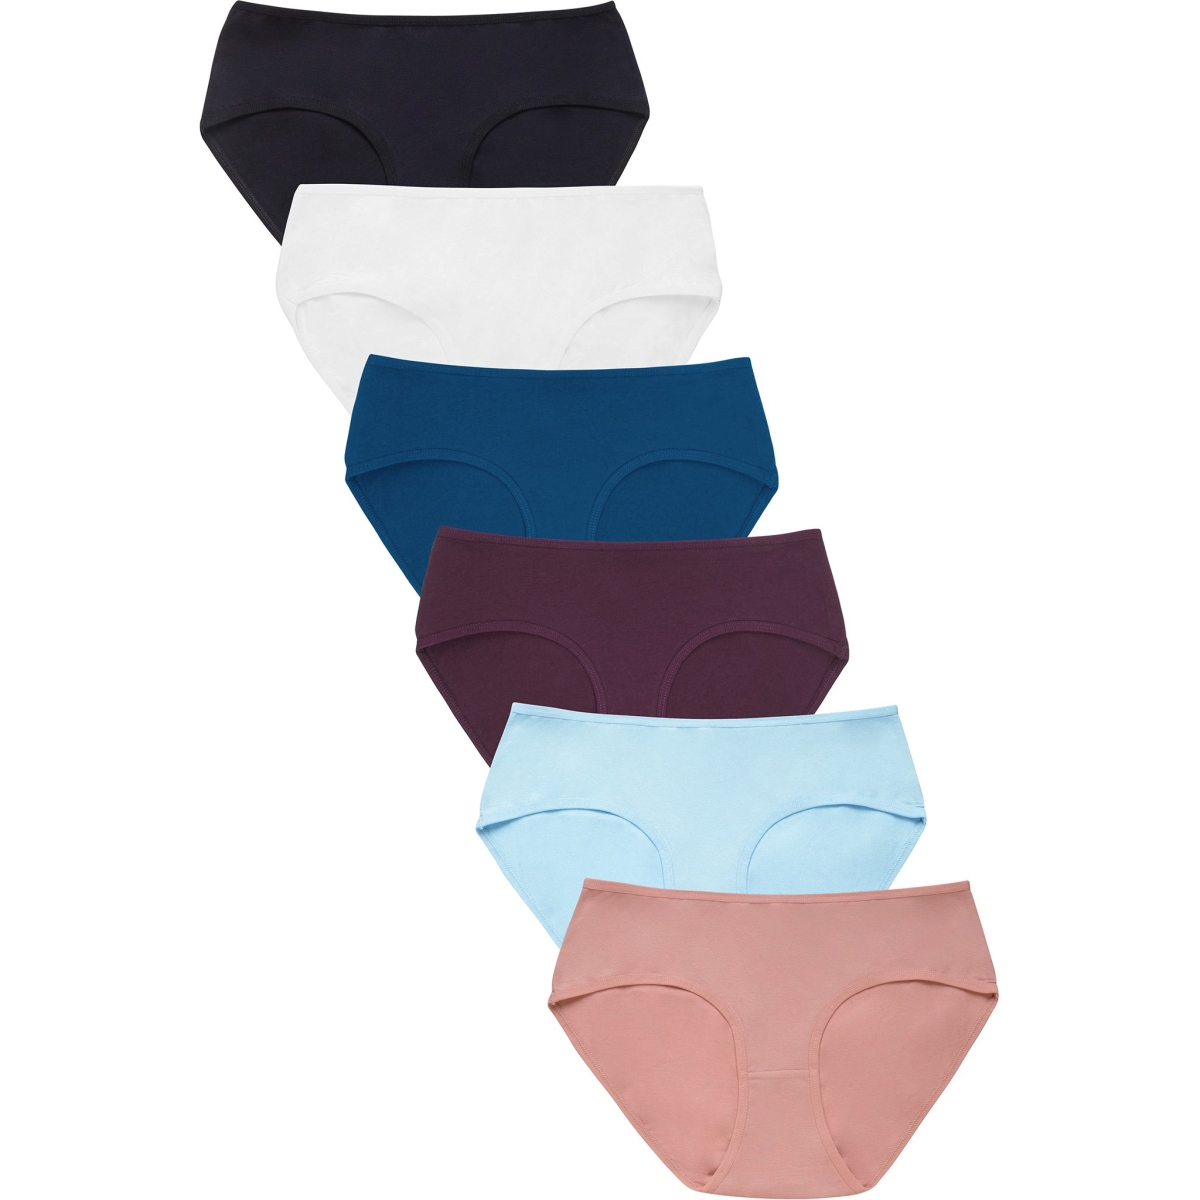 Picture of 247 Frenzy 247-LP1379CKE9-LG Womens Essentials Cotton Stretch Bikini Panty Underwear with Extended Side Seams - Assorted Color - Large - Pack of 6